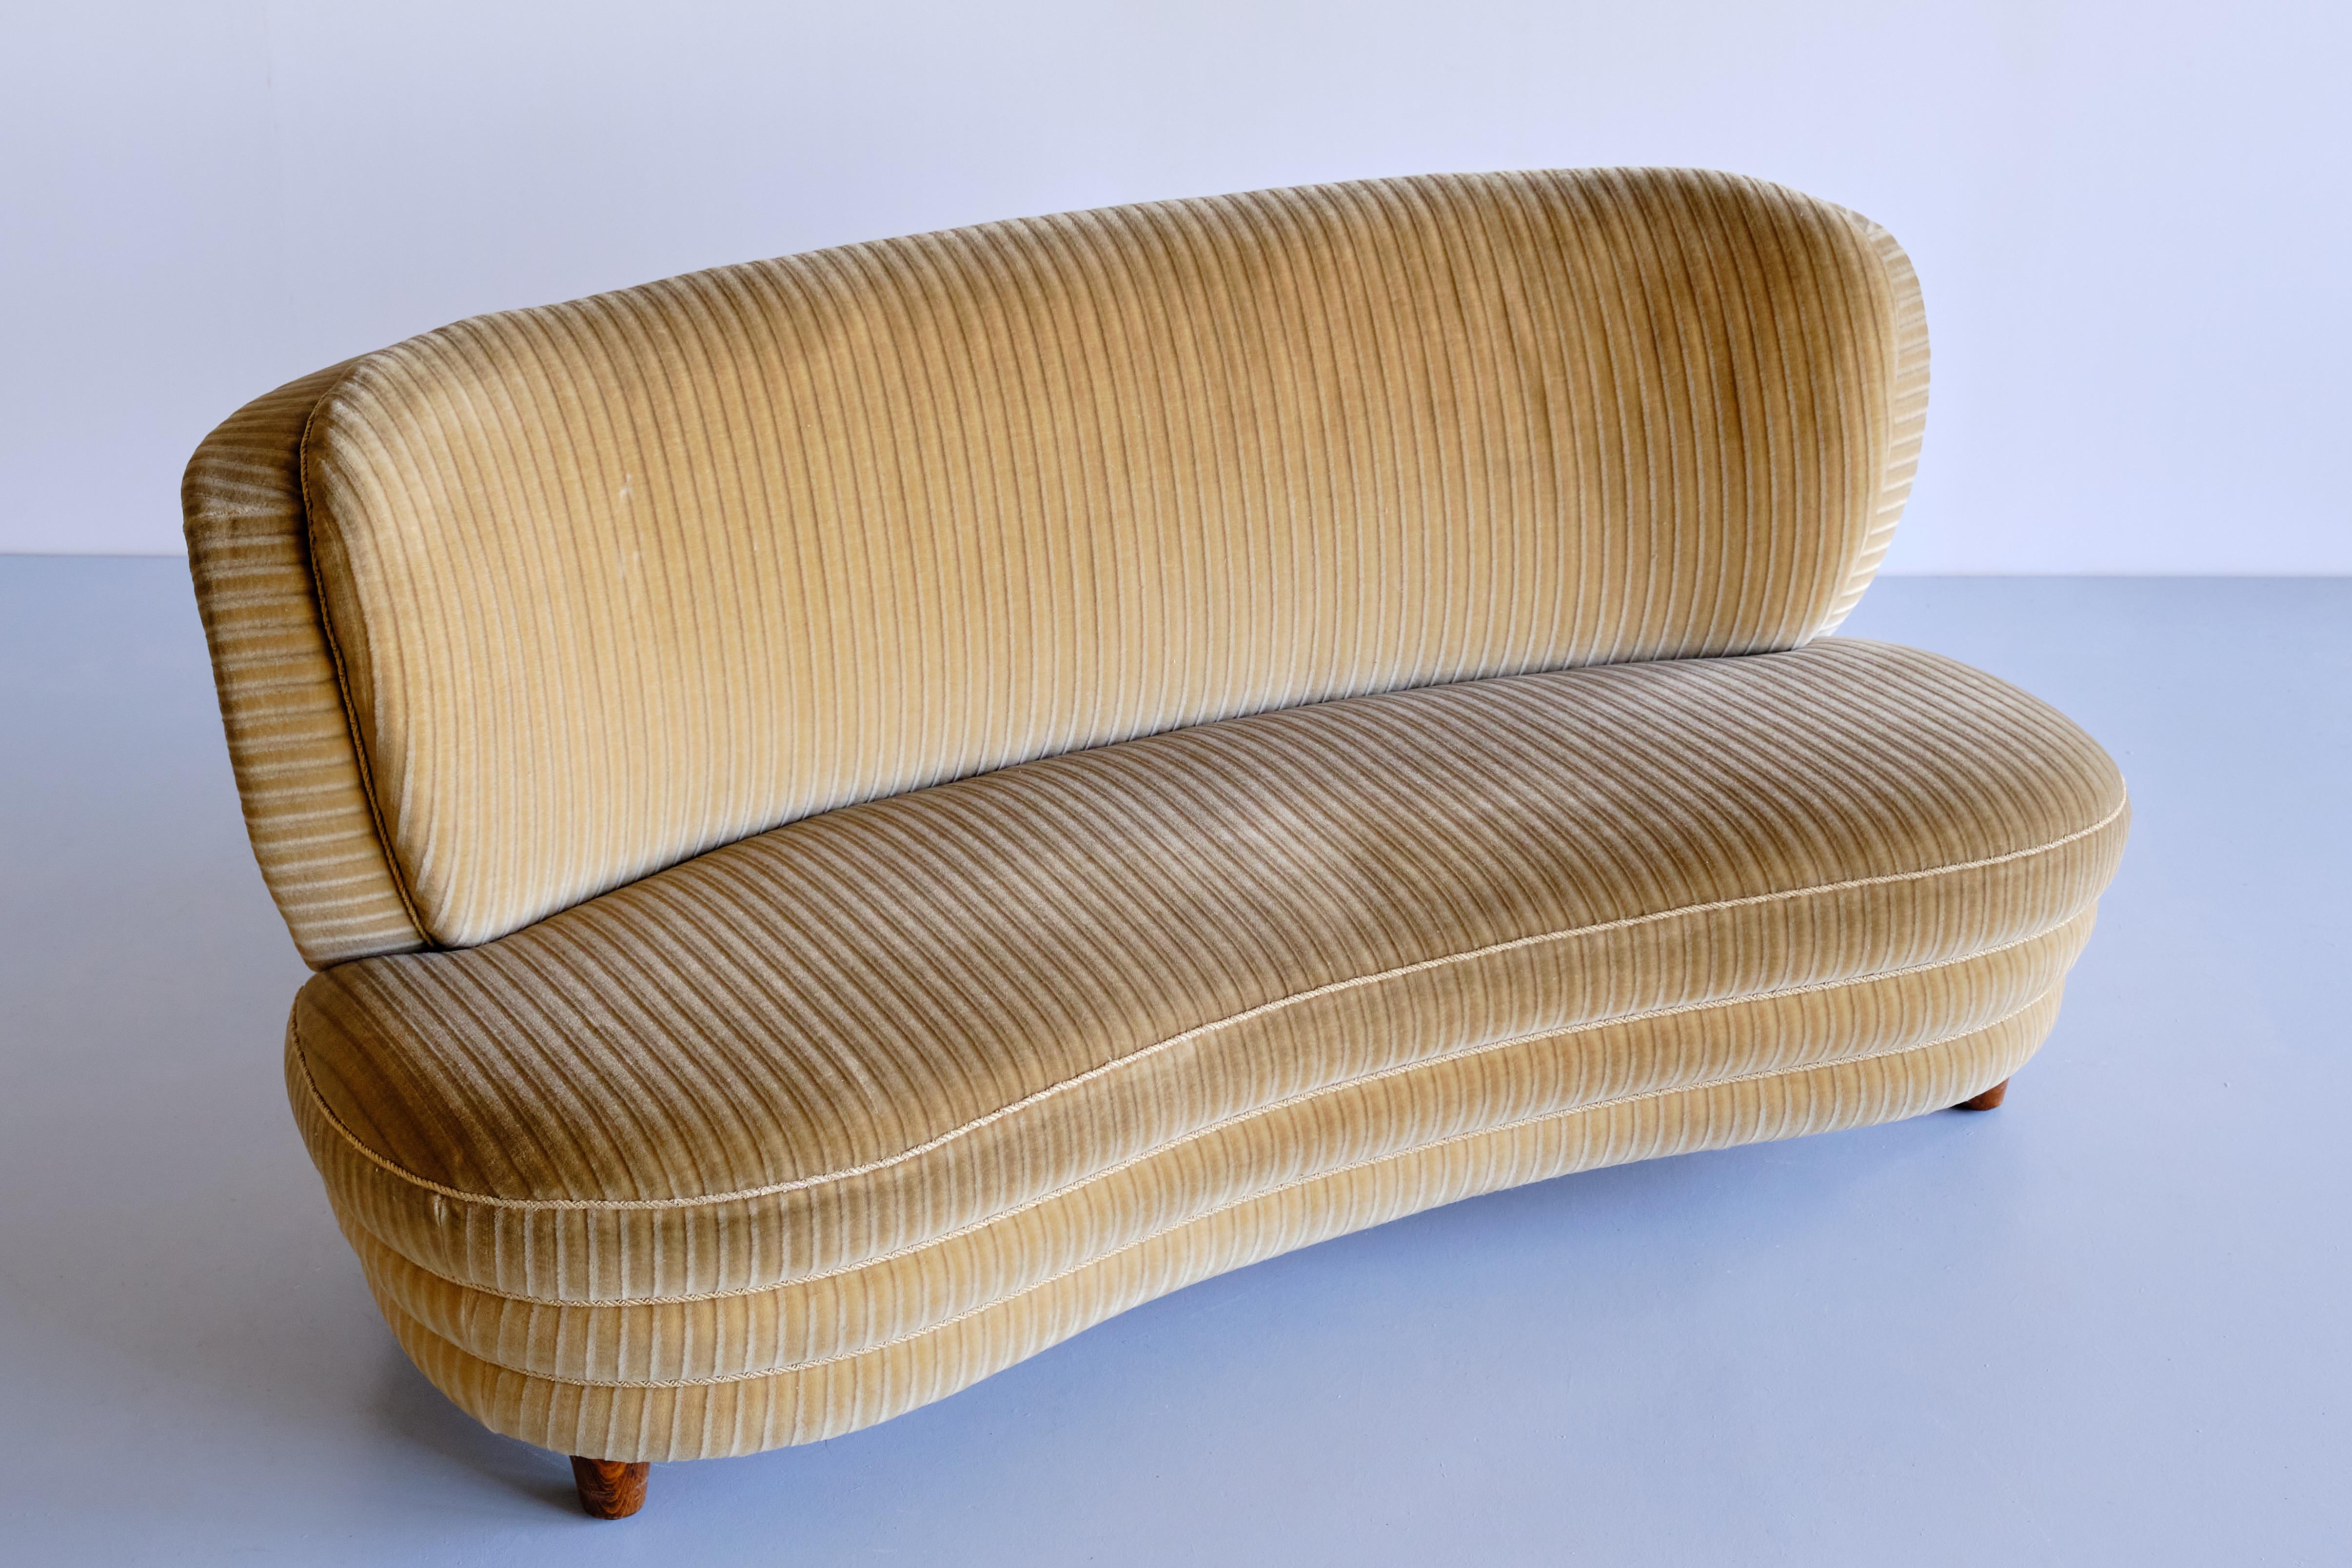 This curved sofa was designed by Adolf Wrenger and produced by his company in Lippe, Germany in the early 1950s. The curved shape and the round lines of both the backrest and seat give the sofa a striking and elegant feel. The seat appears to be